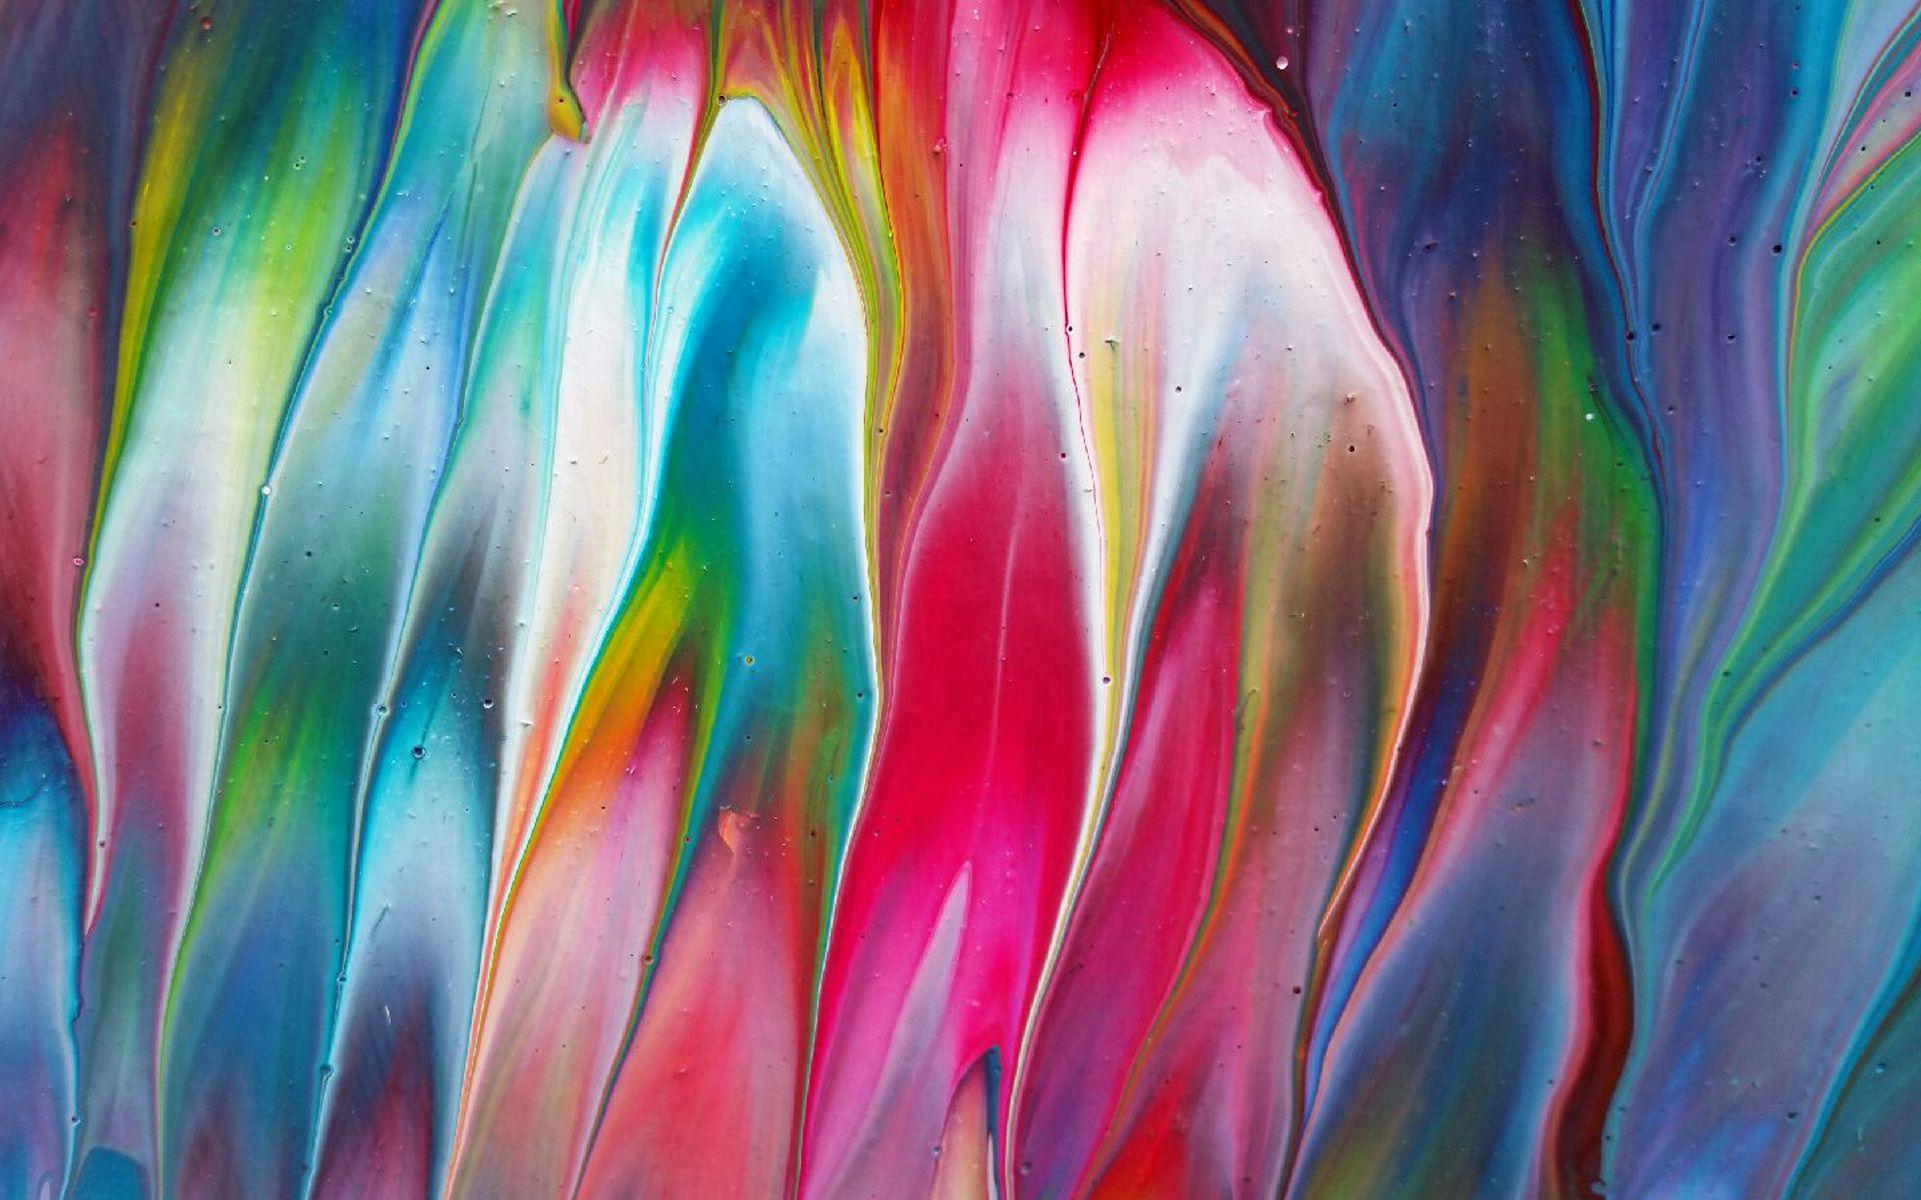 Psychedelic Waterfall No. 5; an original, one of a kind, spontaneous, extra large 60x60 inch abstract expressionism painting. Stunning conversation statement piece, focal point in any stylish space. Add a beautiful and bold pop of vibrant, vivid